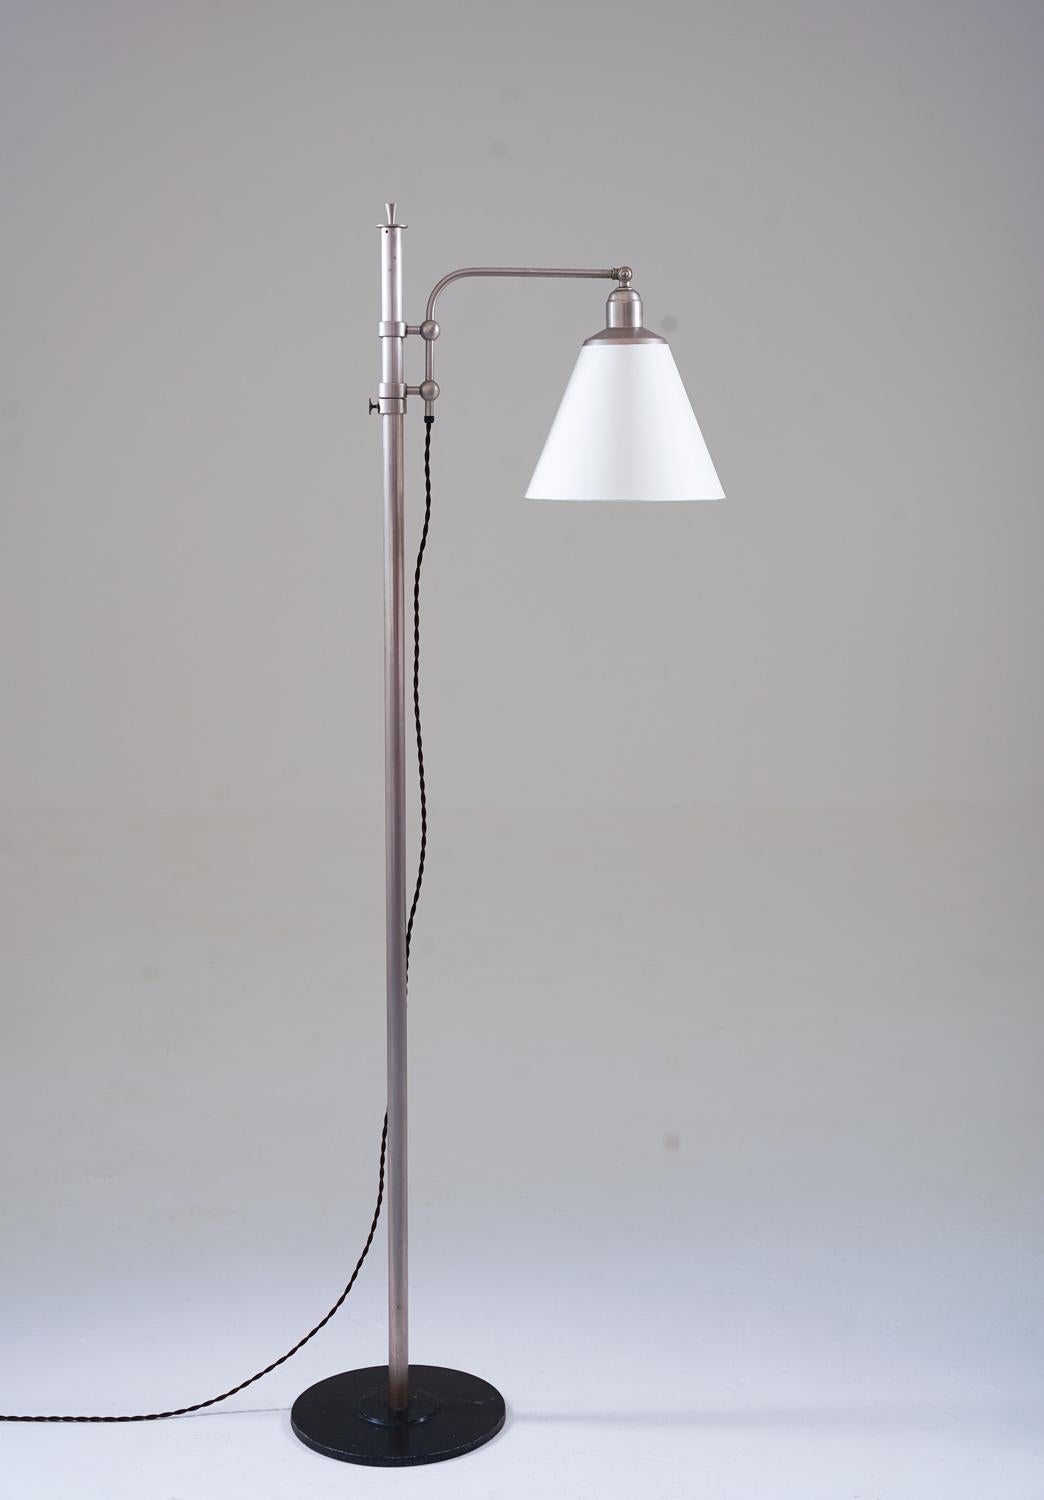 Lovely early functionalistic floor lamp manufactured in Sweden, 1930s. 
The lamp consists of a black iron base, supporting a metal tube with a swivel arm that holds the shade. 
Height is adjustable between 132-180cm (60-70.8”)

Condition: Good